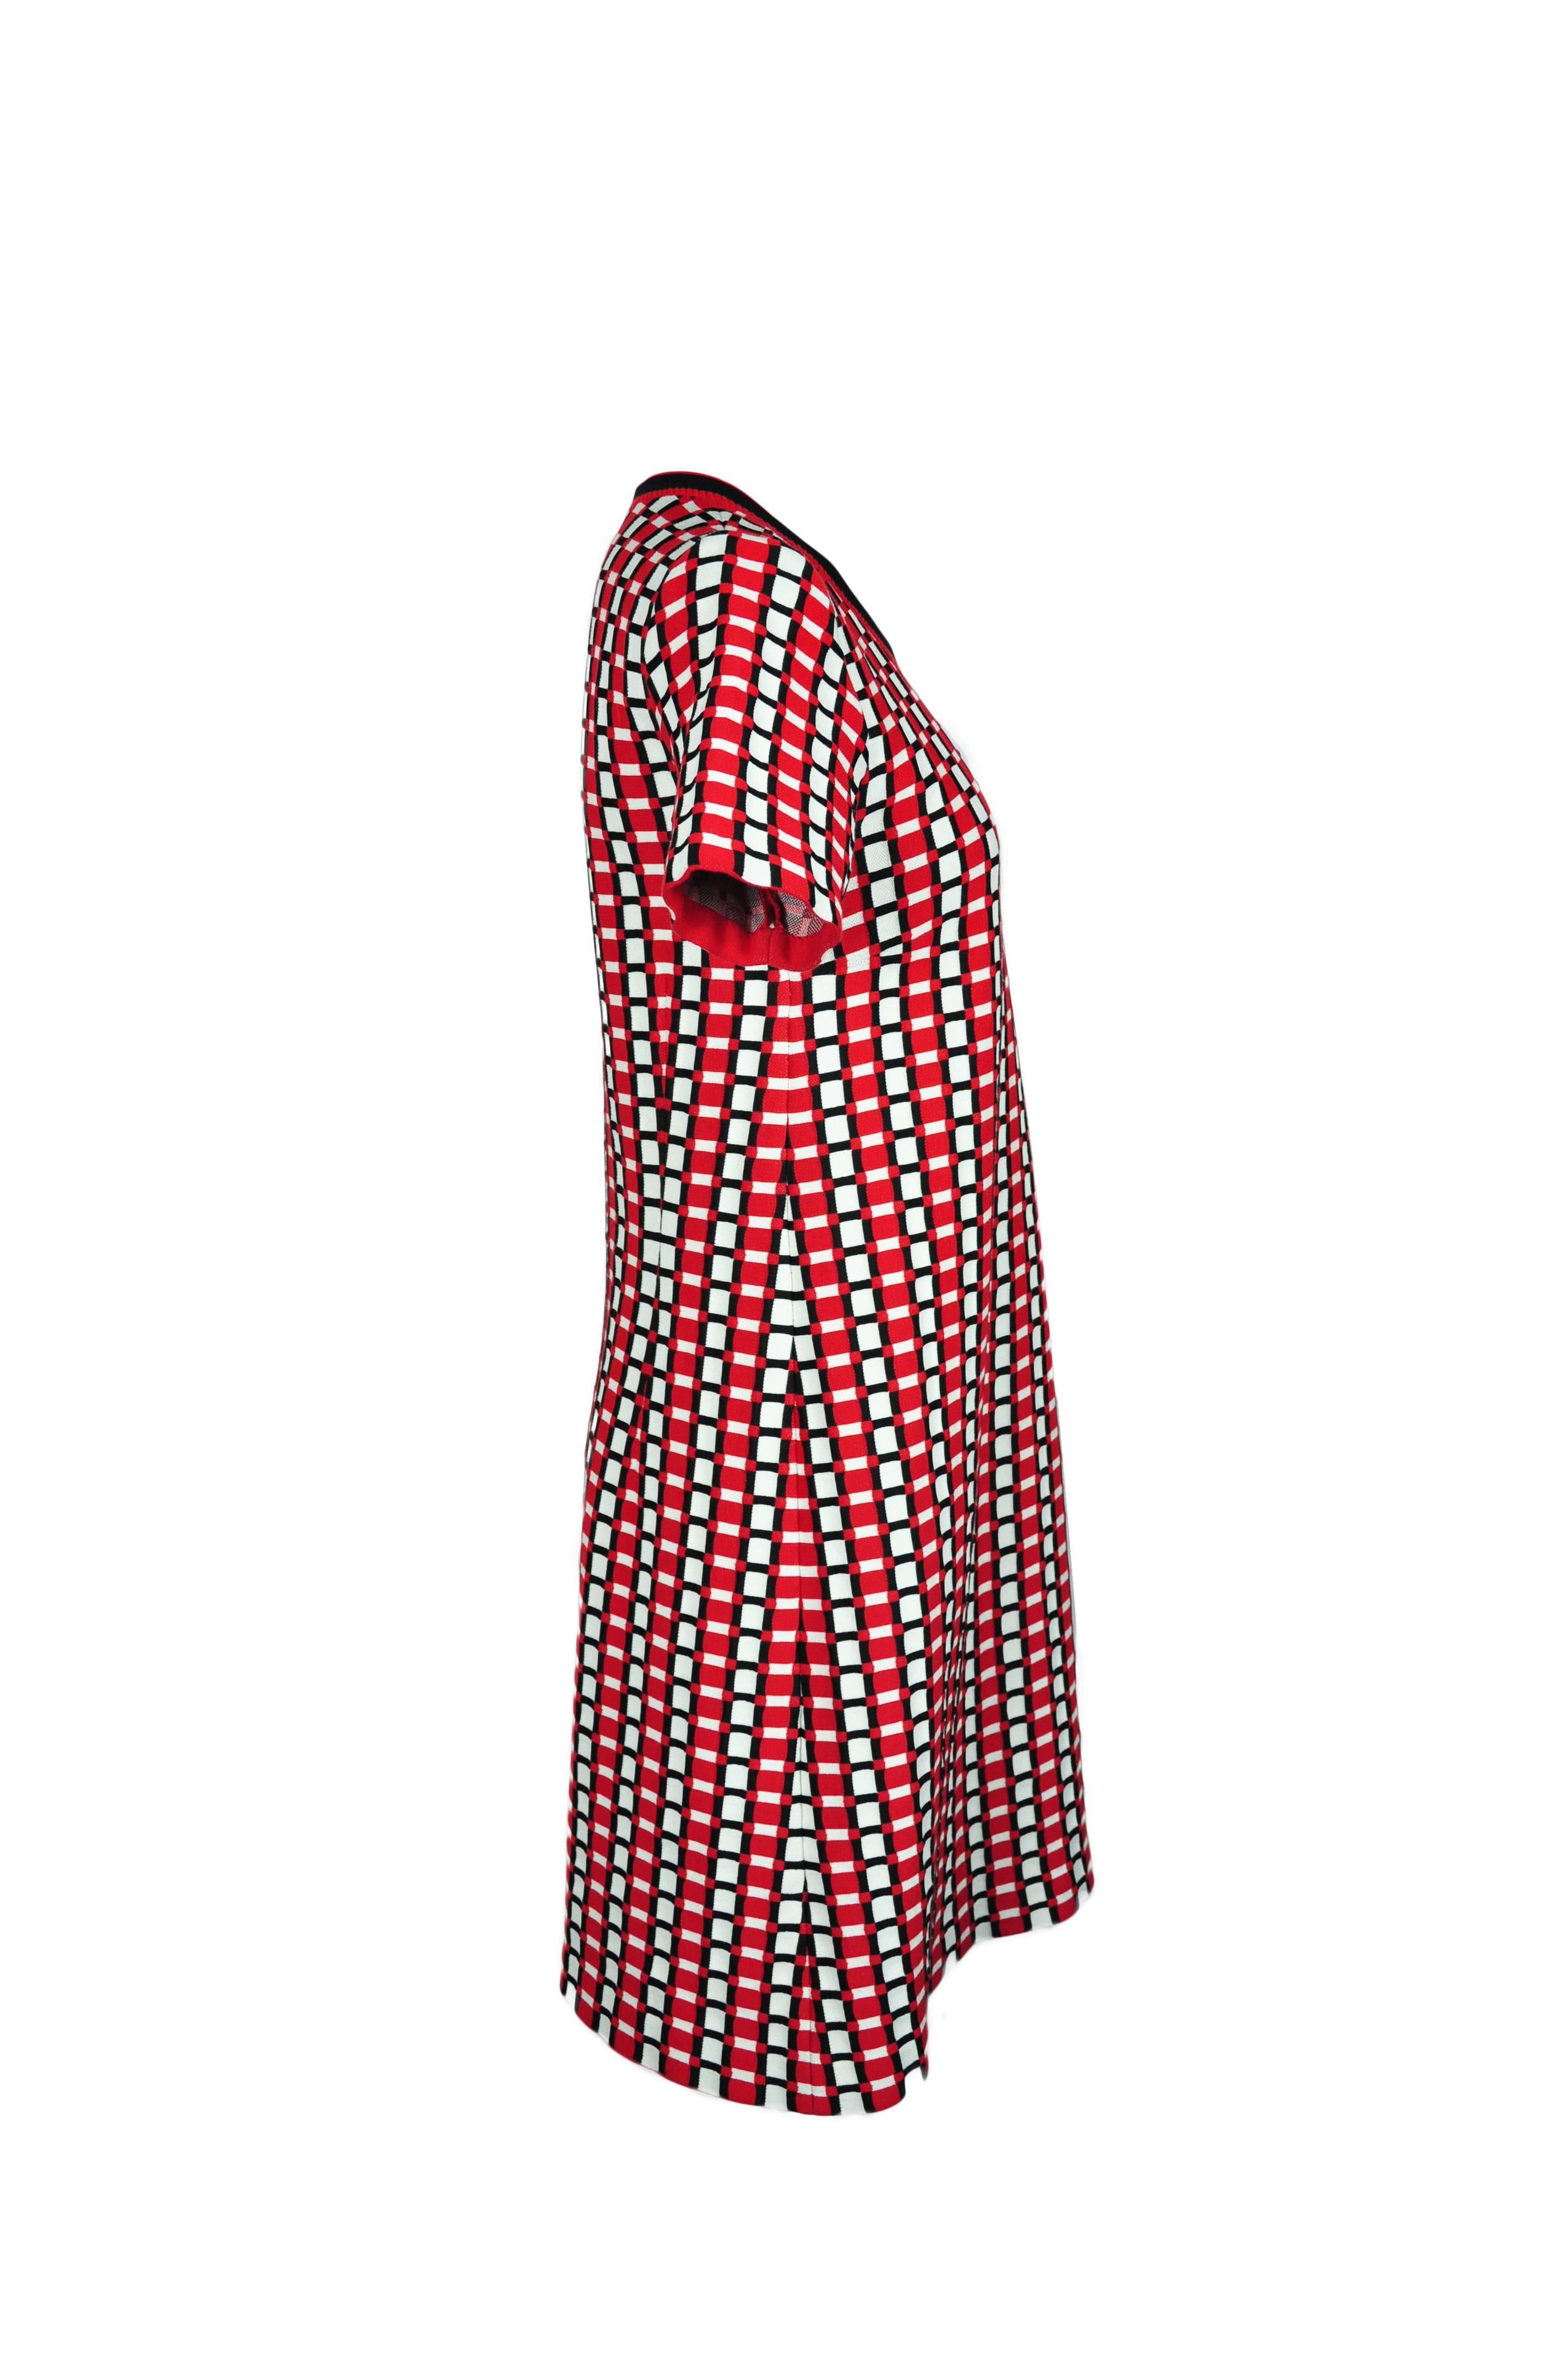 Prada 2015 S/S Multi-color Slip-on Checked Knit Dress In Excellent Condition For Sale In Hong Kong, Hong Kong